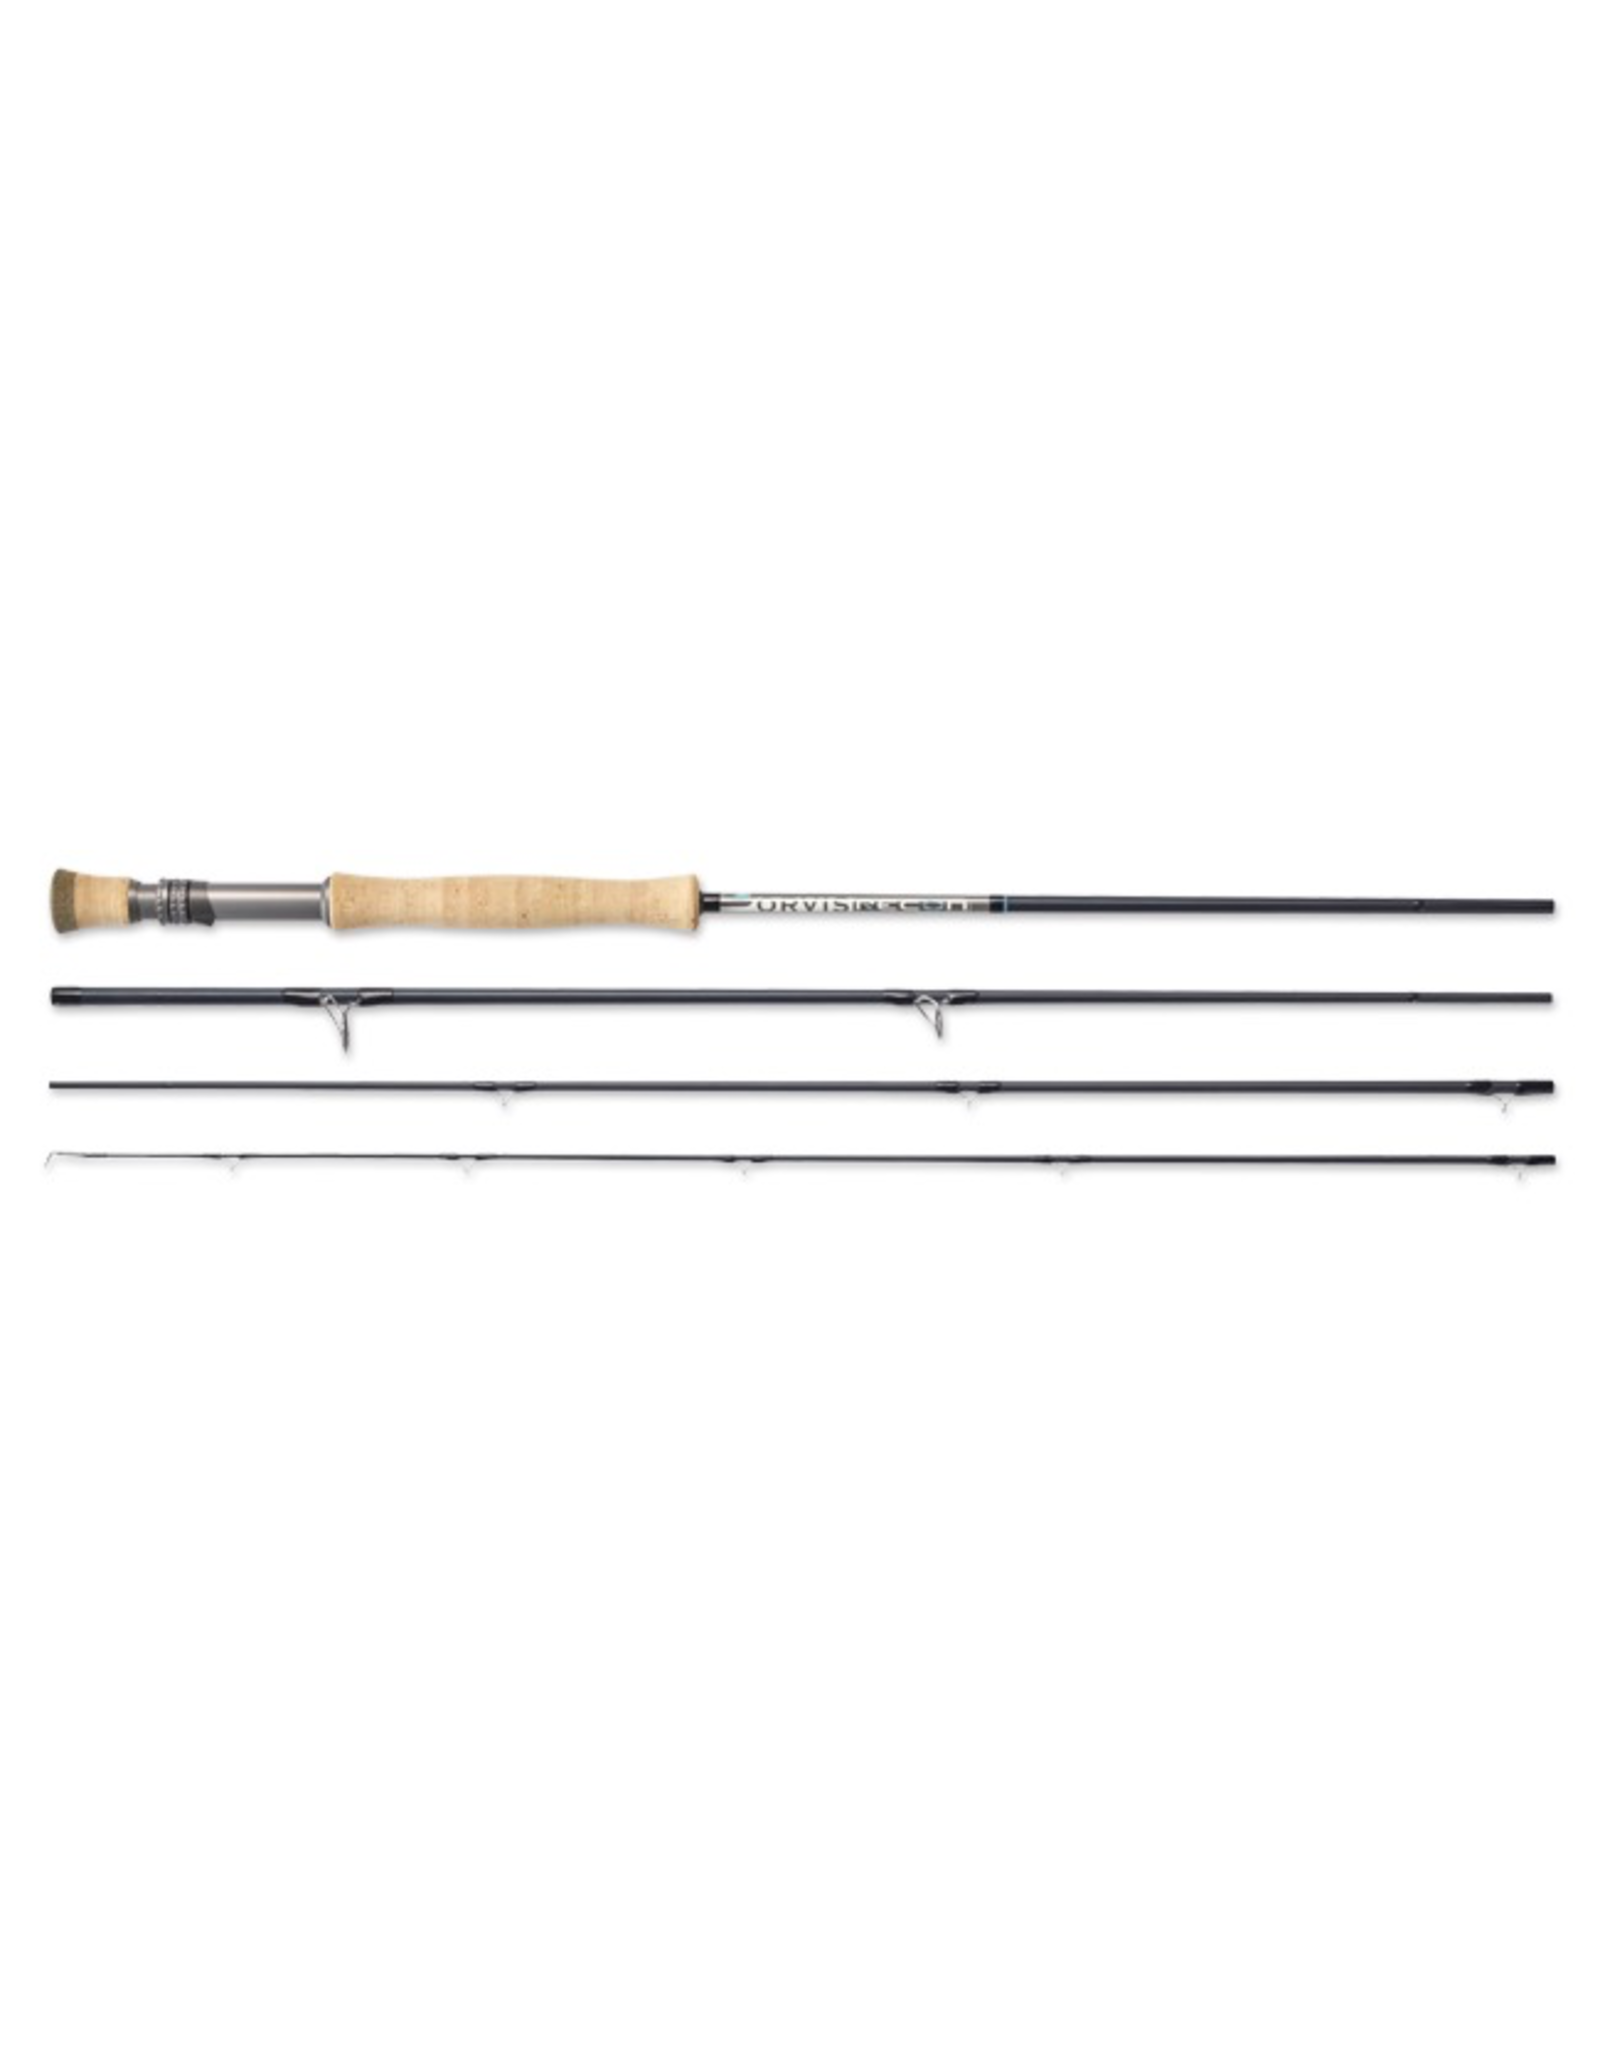 So this is my setup. Orvis Recon 9ft 6wt and Hydros sl III. I like this rod,  it's light and well made. But I do feel that it lacks a bit of